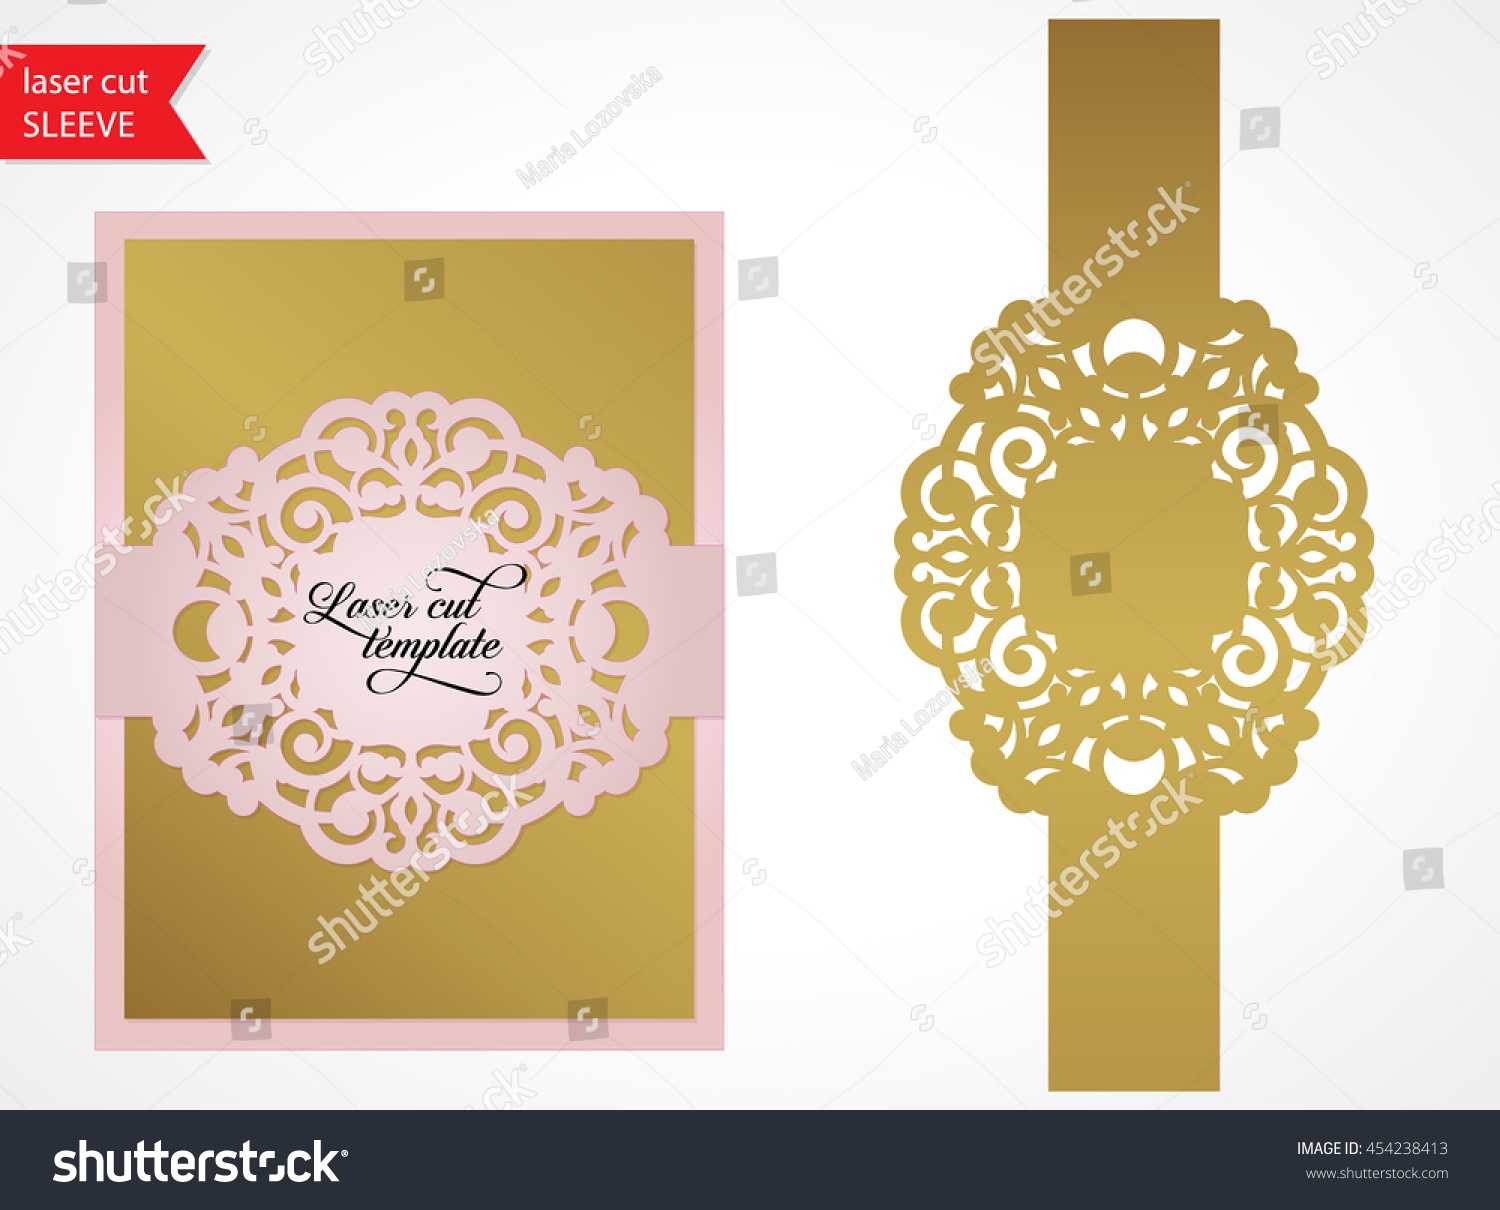 Laser Cut Wedding Invitation Template Silhouette | Royalty Inside Silhouette Cameo Card Templates